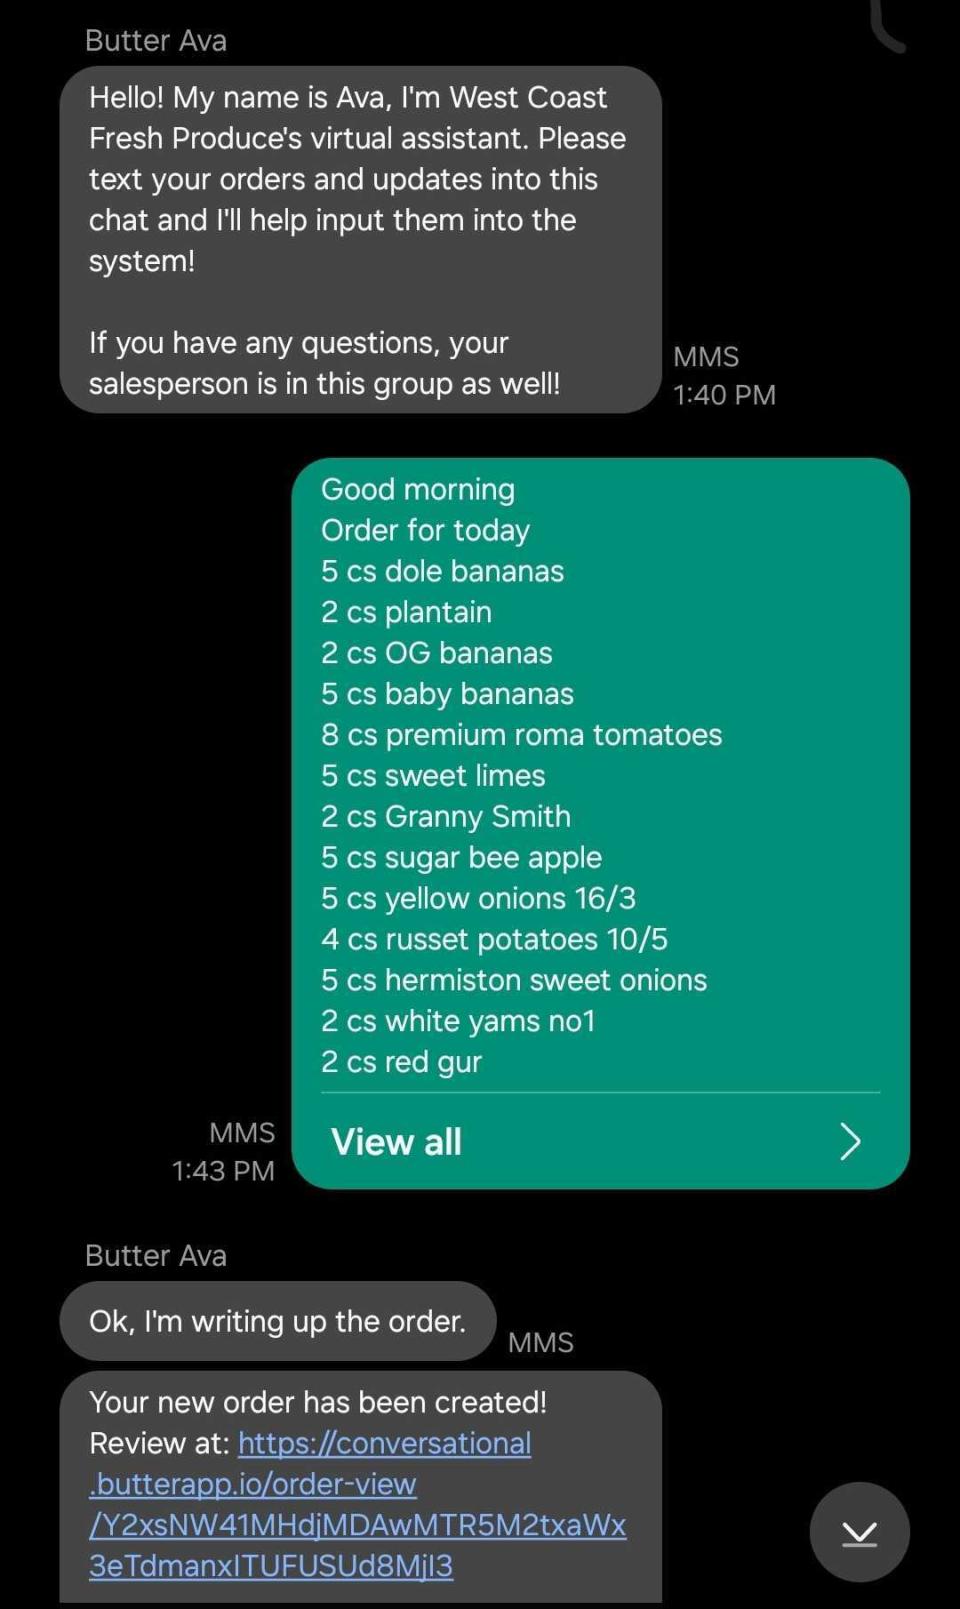 Butter's AI assistant helps generate new orders based on text messages.